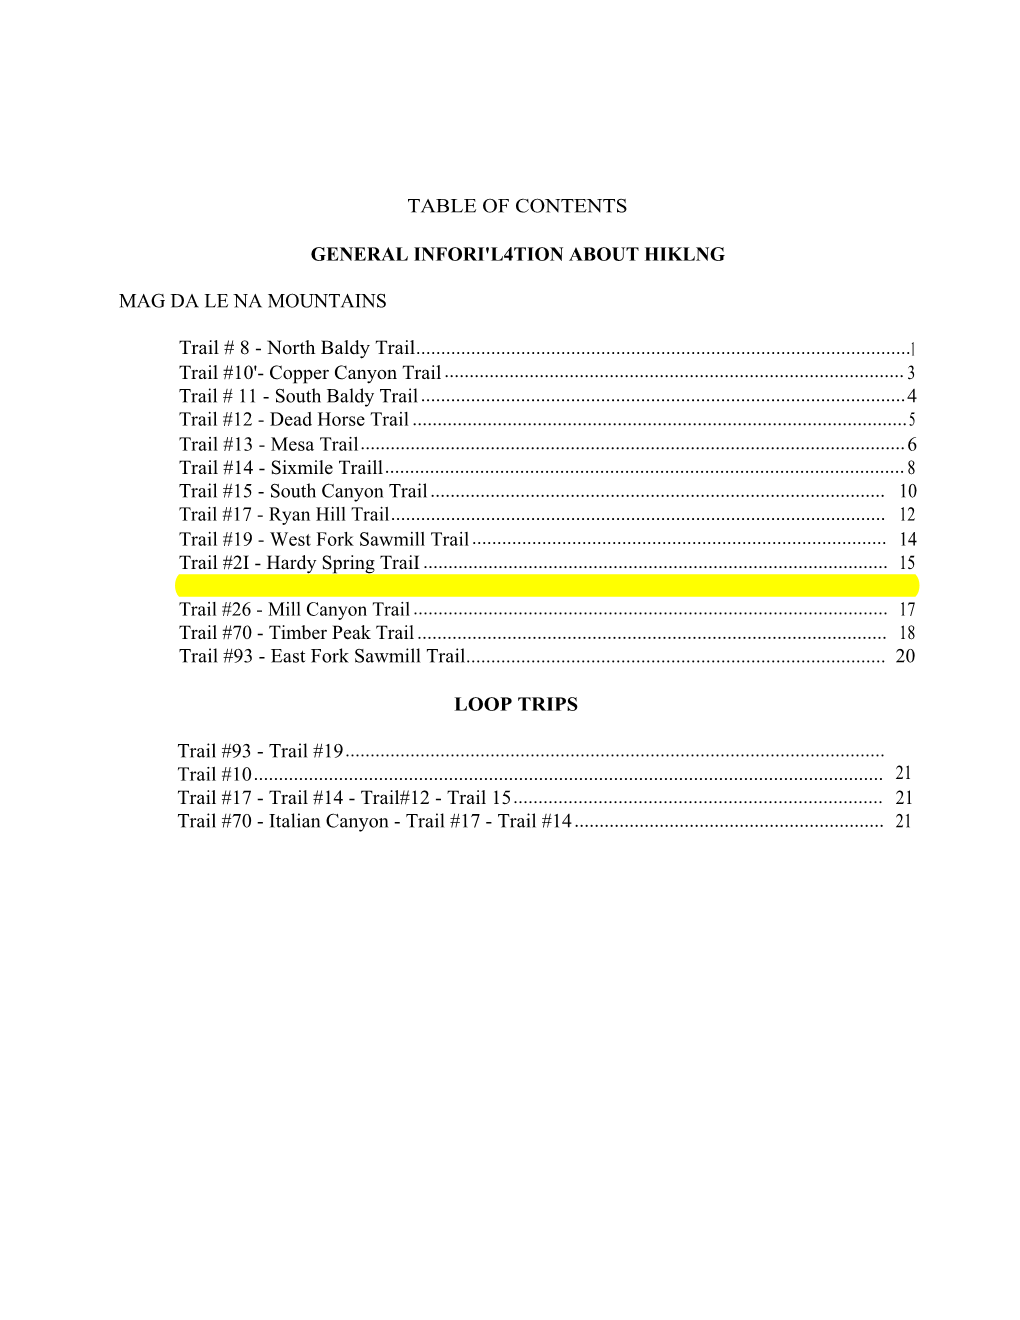 Table of Contents General Infori'l4tion